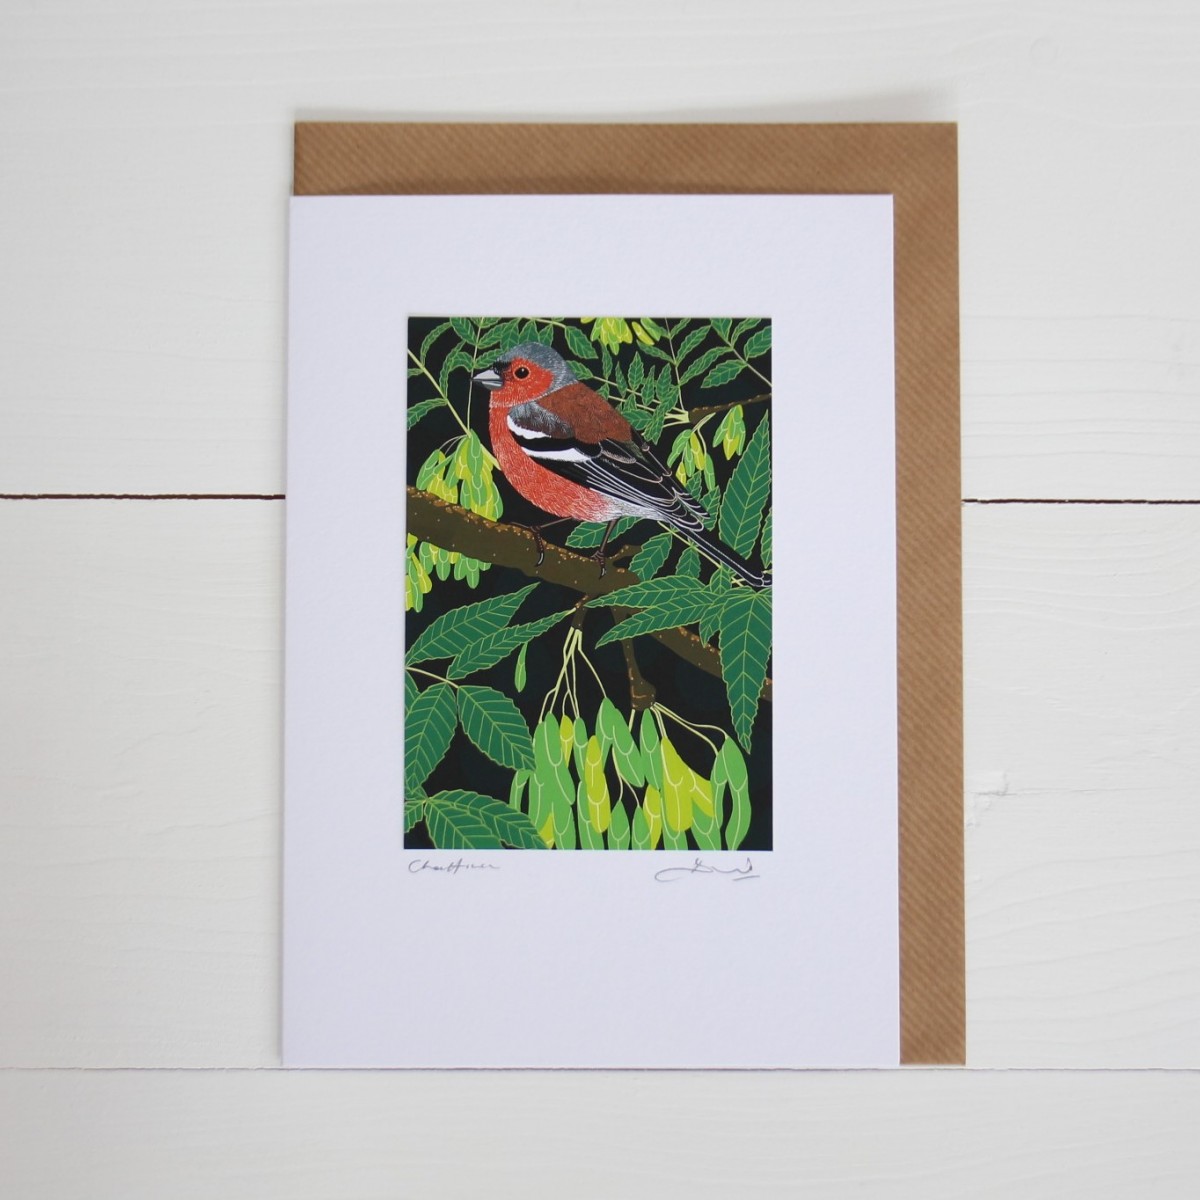 Chaffinch Bird Flower Handmade Hand Titled And Signed Greeting Card A5